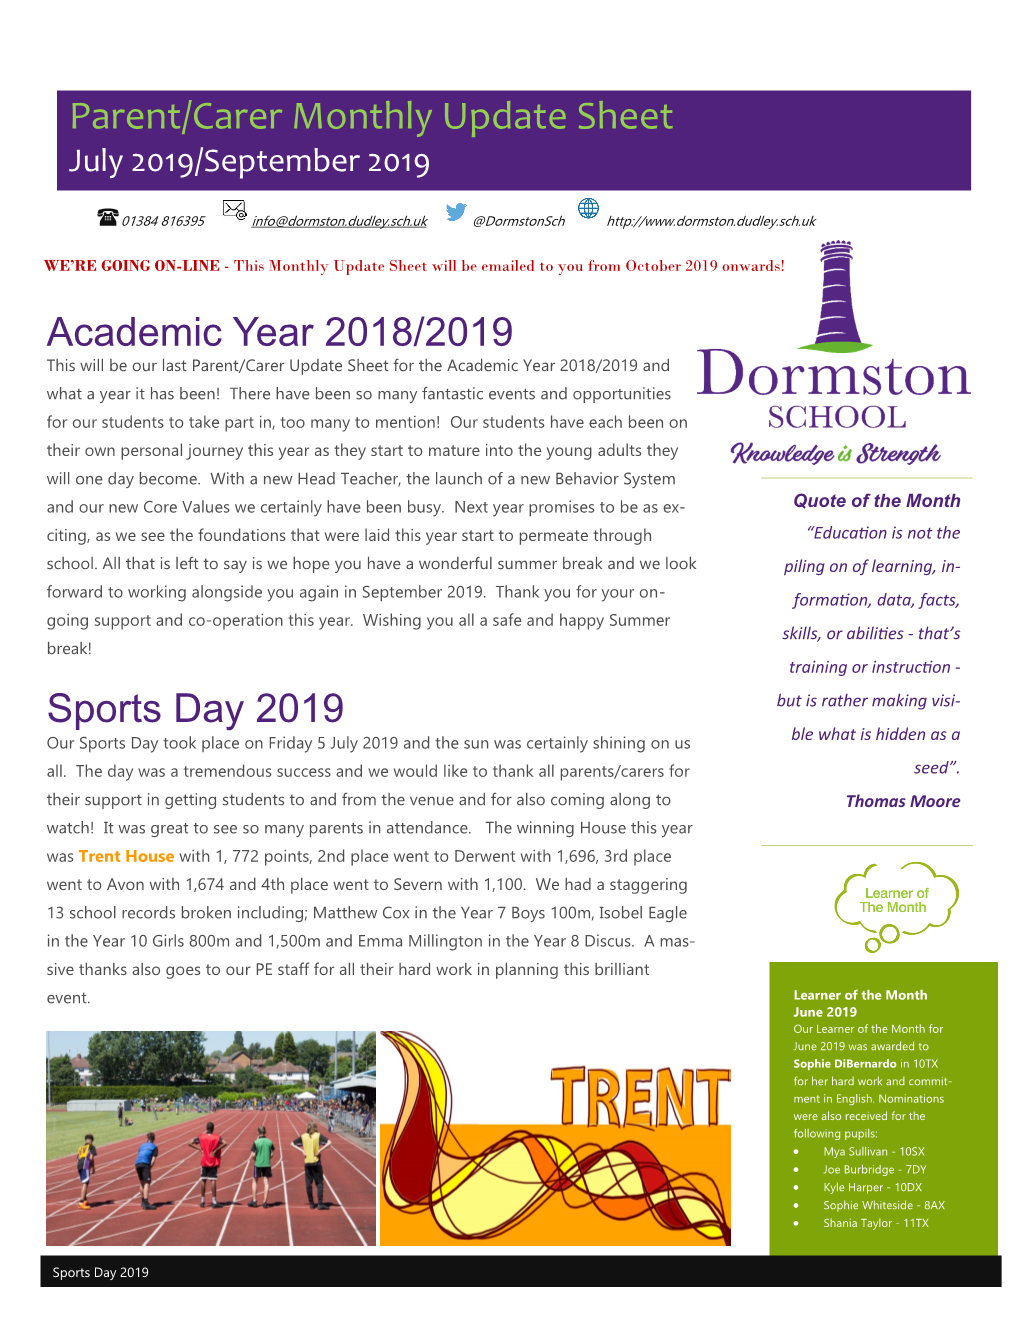 Academic Year 2018/2019 Sports Day 2019 Parent/Carer Monthly Update